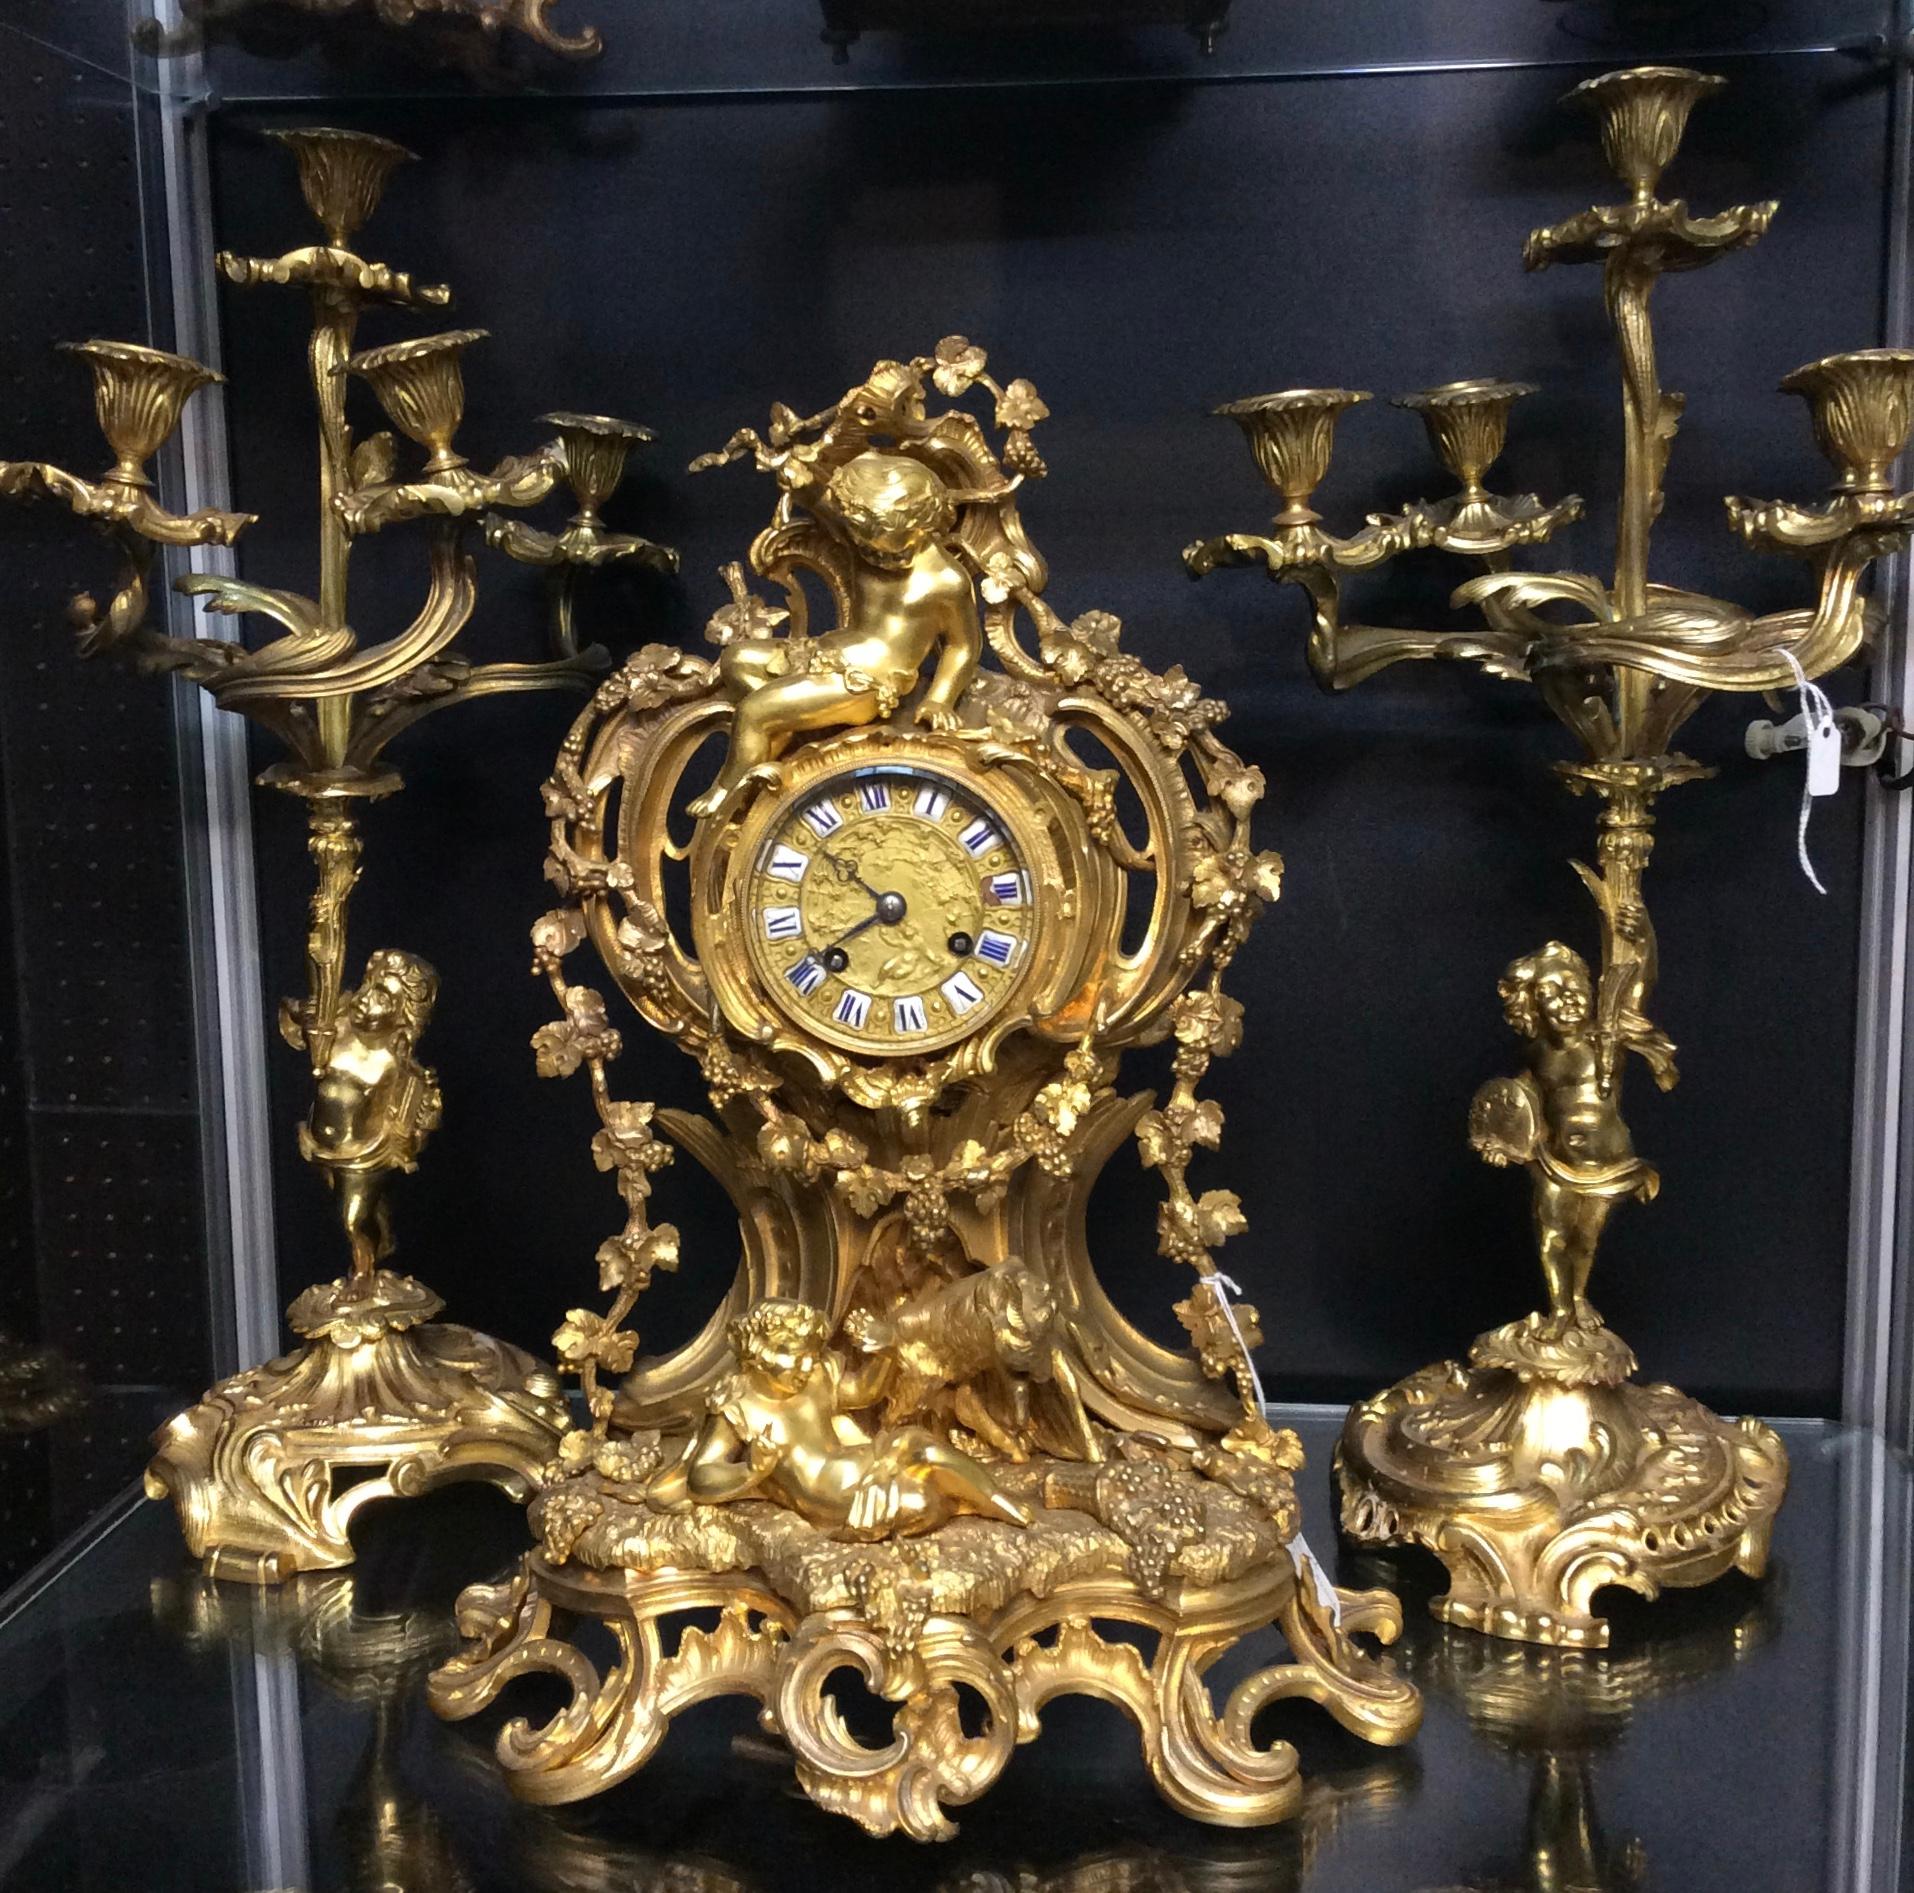 A beautiful three piece bronze gilt clock set, this lovely piece has been ornately decorated with gold leaves and cherubs. Its bronze face has a telephone style dial on enamel and blue roman numerals, the clock is striking on a bell and comes with